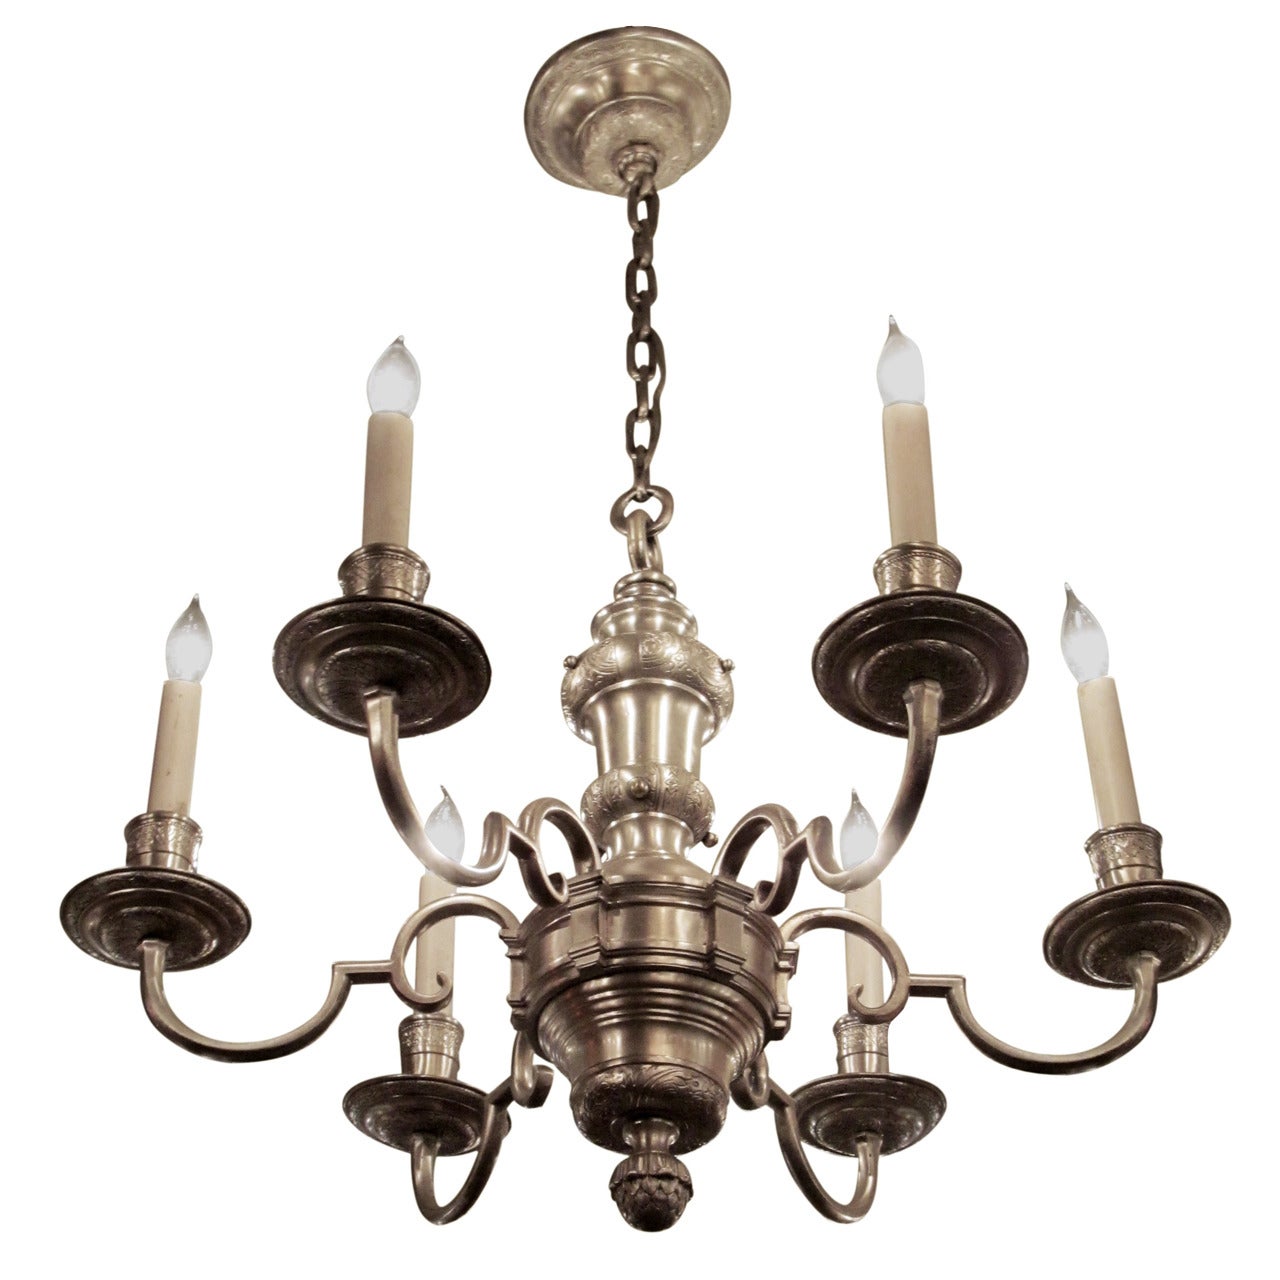 1920s, Georgian Silver Plated Bronze Chandelier with Six Arms